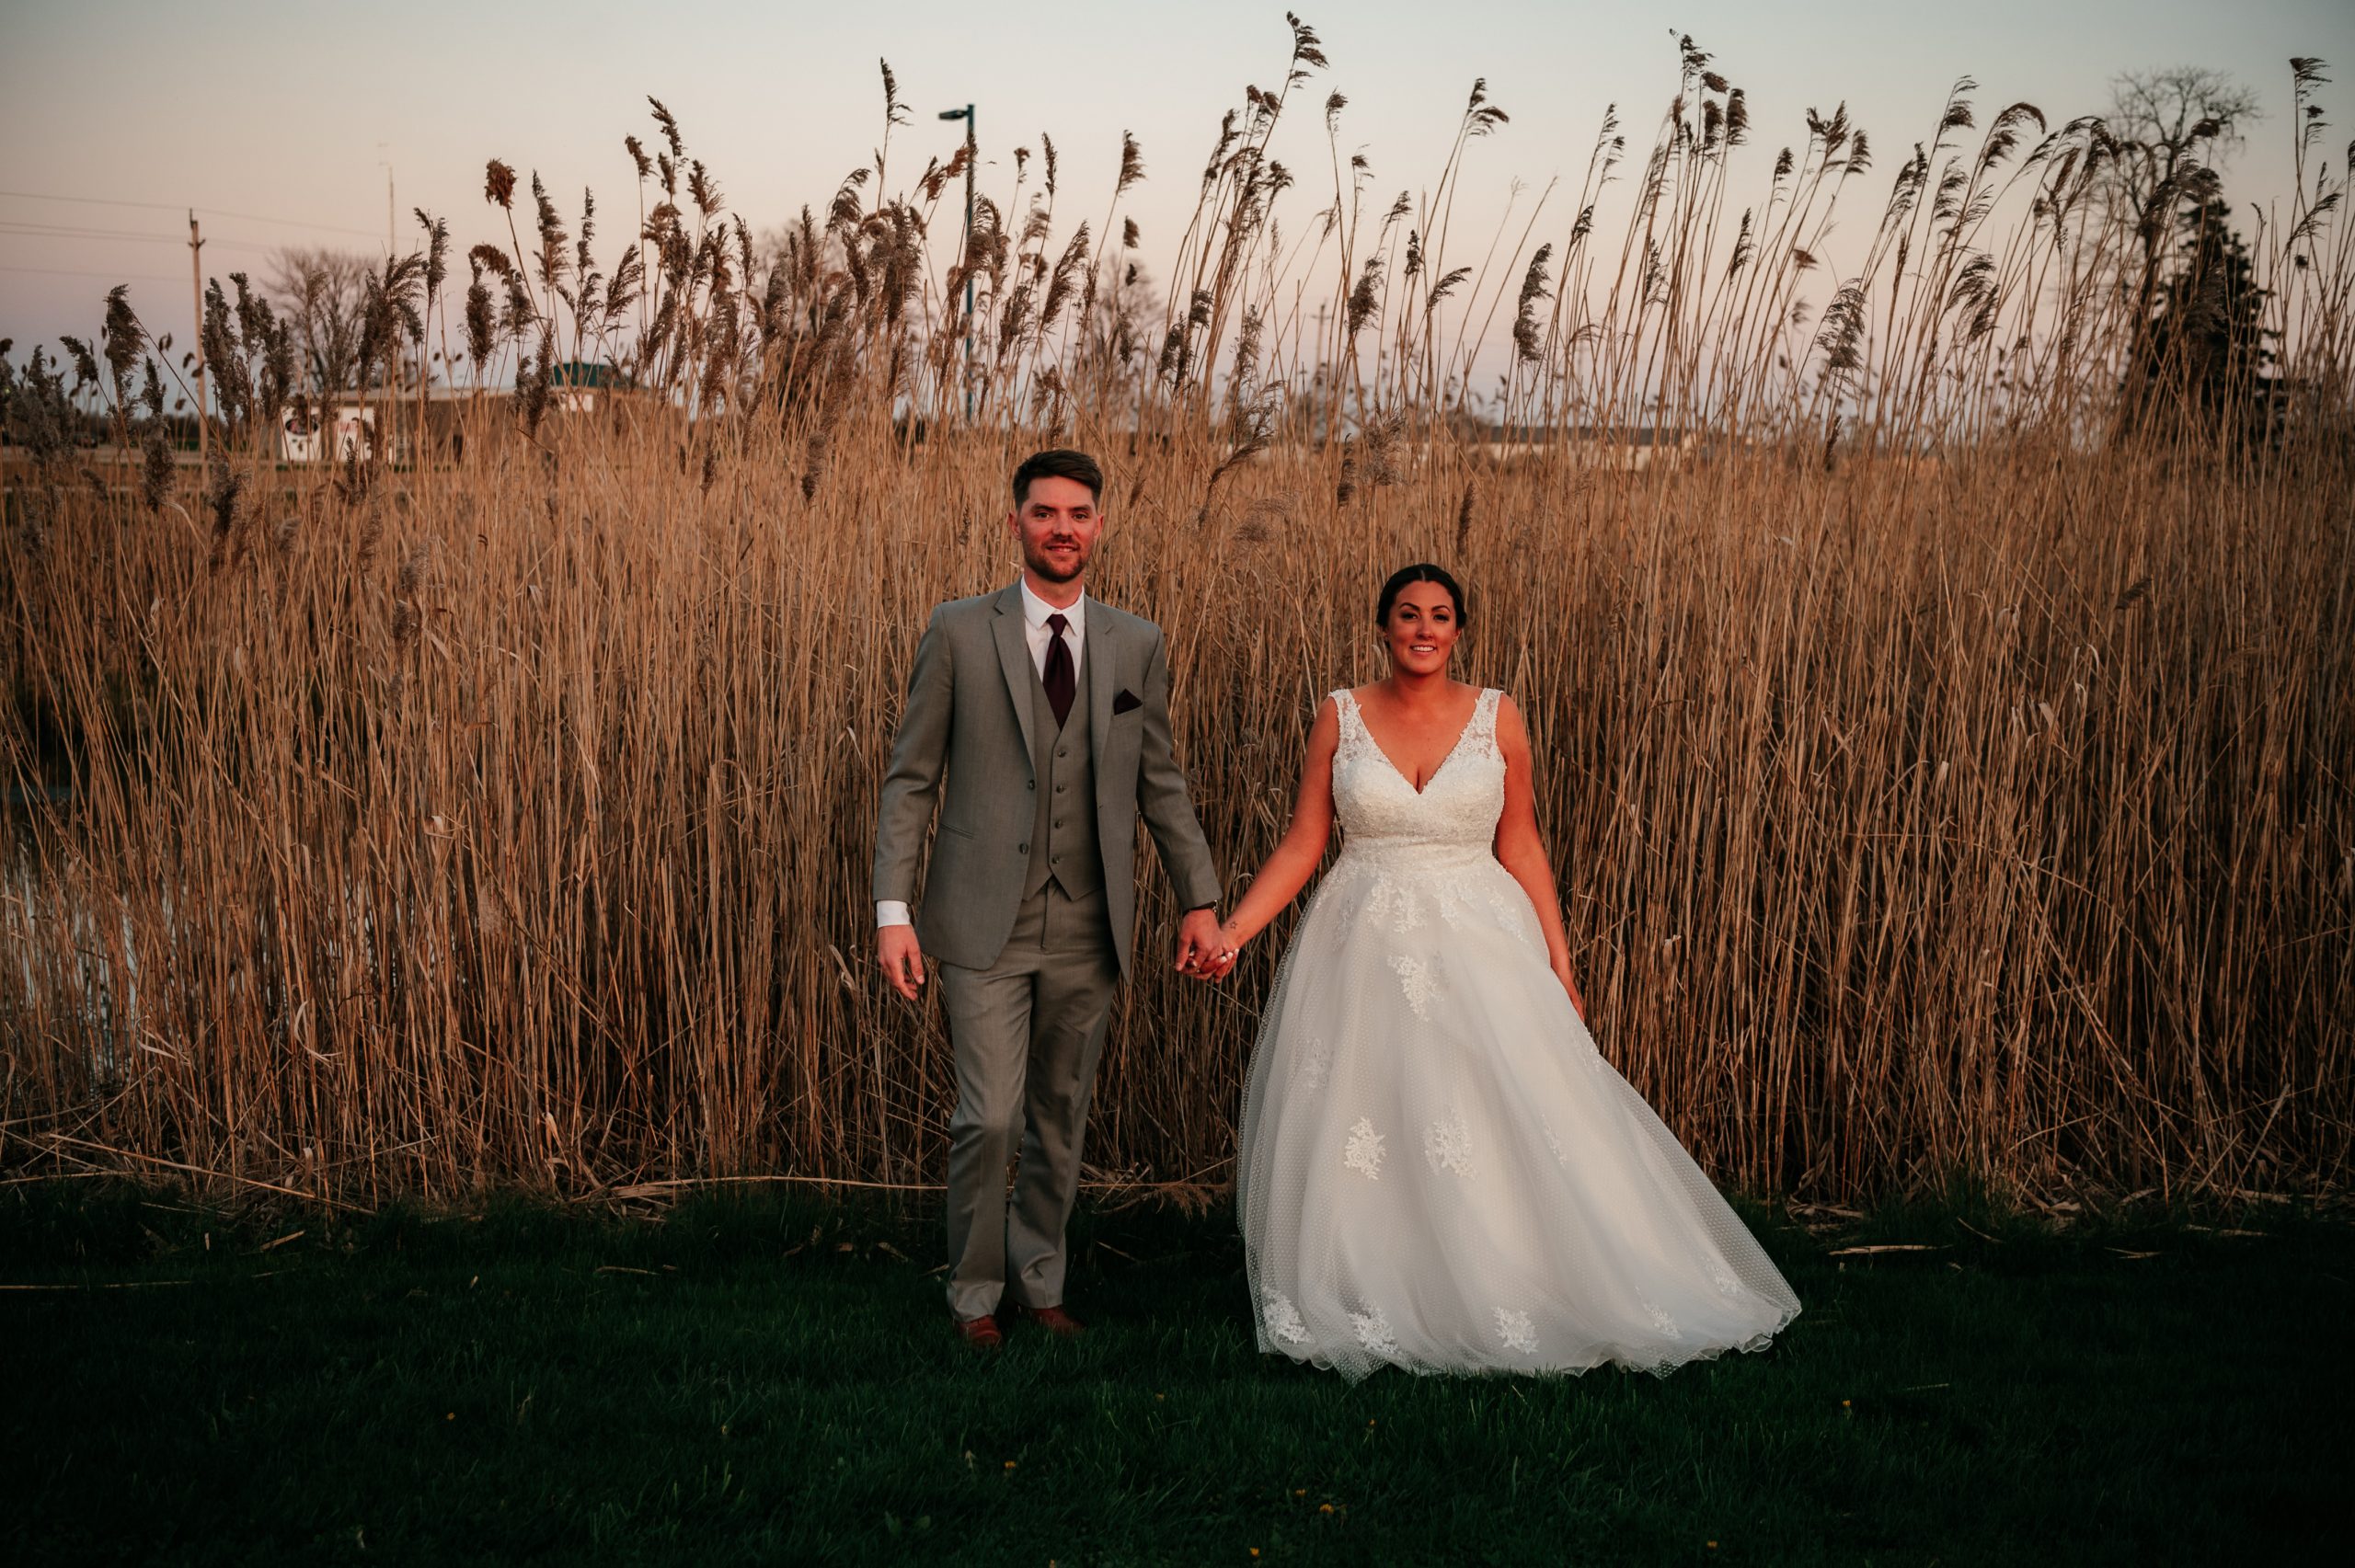 The Wedding Ring, Natalie Rose Photography, London Ontario Wedding Photographer, Best Western PLUS Stoneridge Inn, London event venue, Bride and Groom in tall grass at sunset